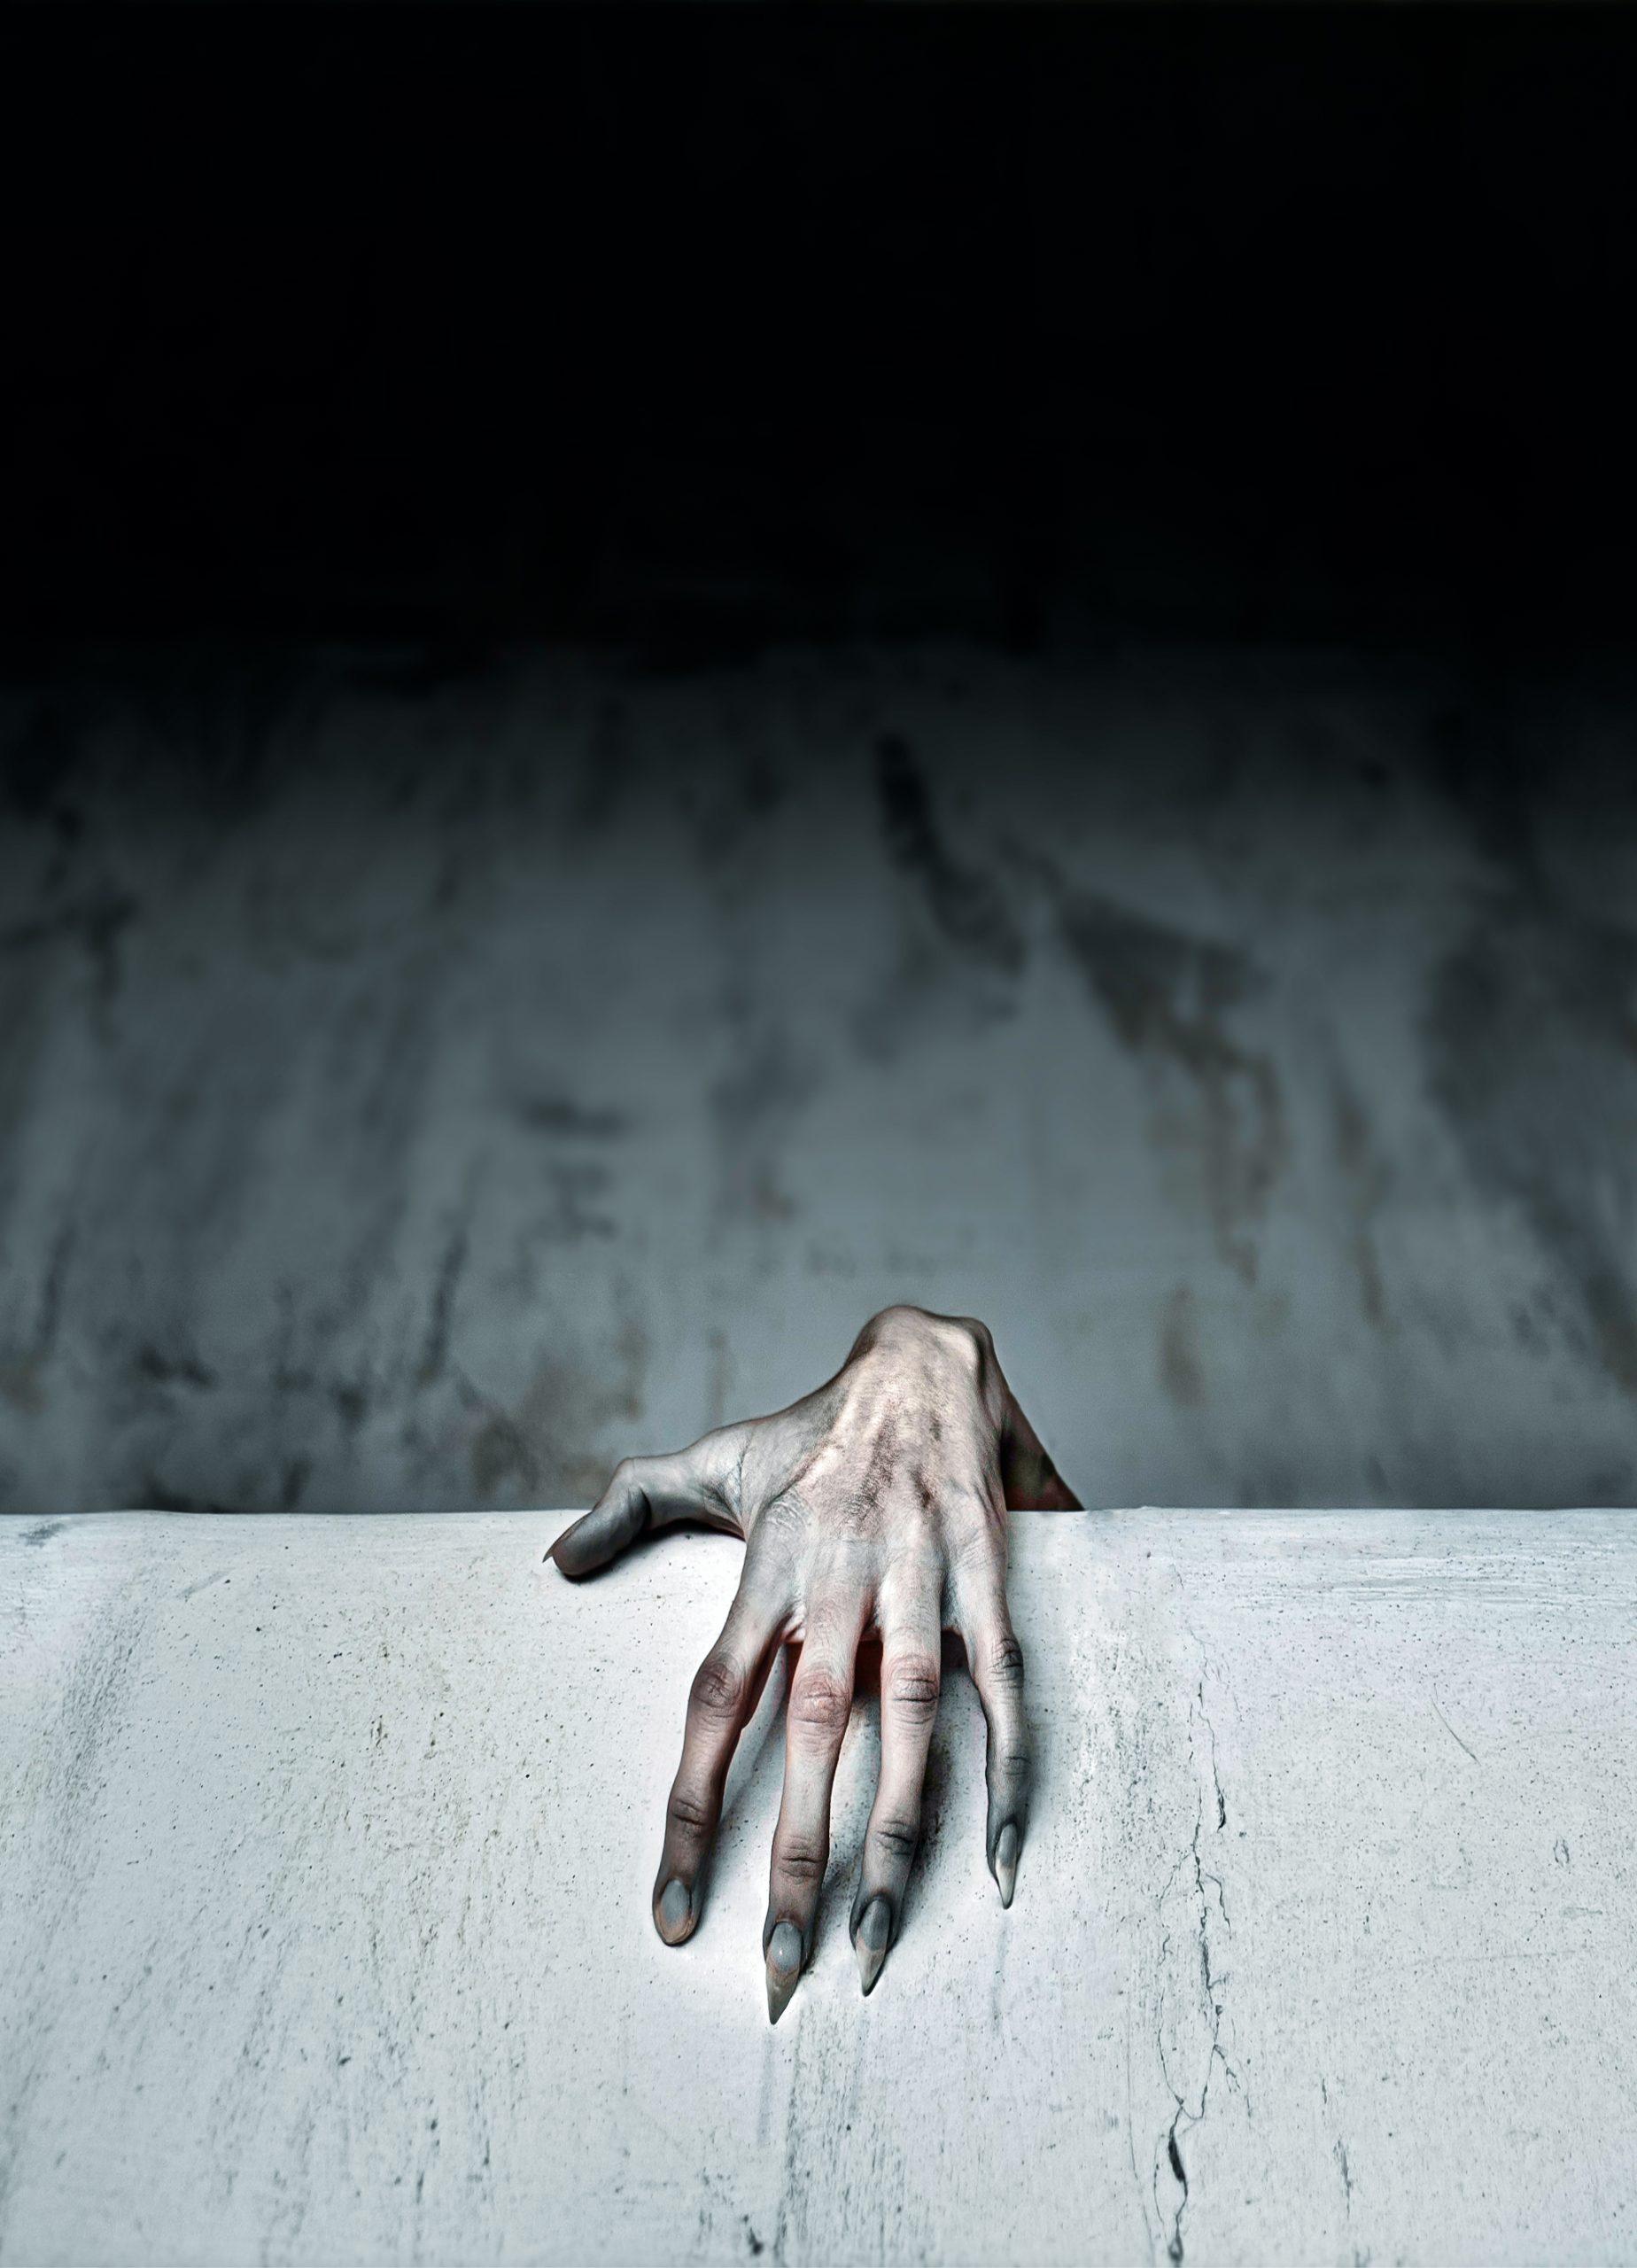 A spooky female hand protruding from behind a wall